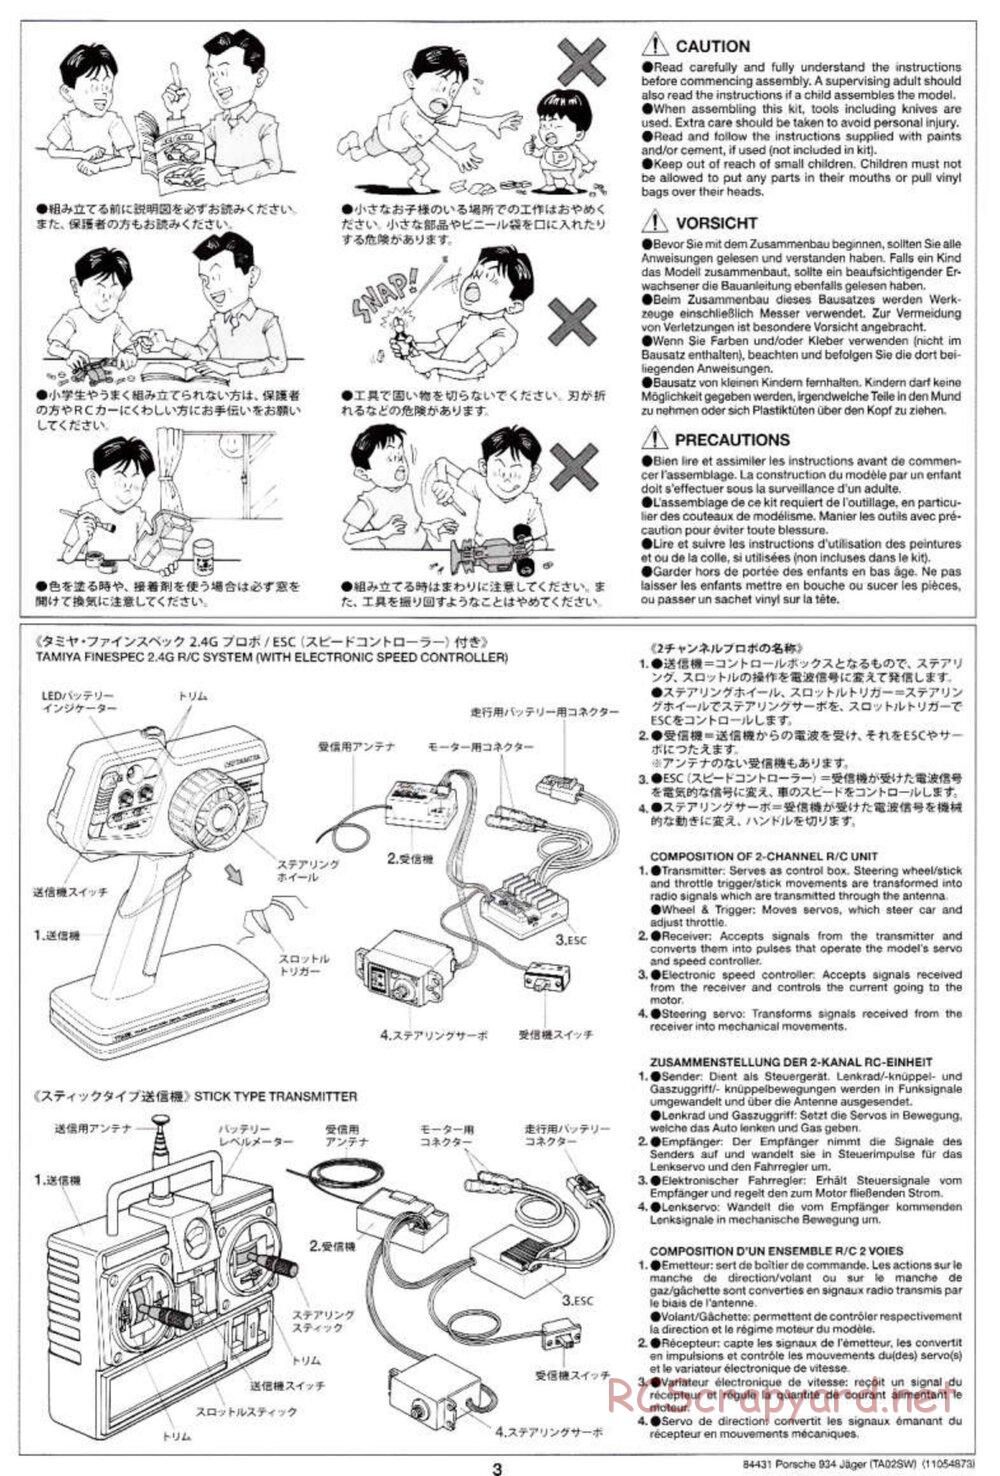 Tamiya - Porsche Turbo RSR Type 934 Jagermeister - TA-02SW Chassis - Manual - Page 3